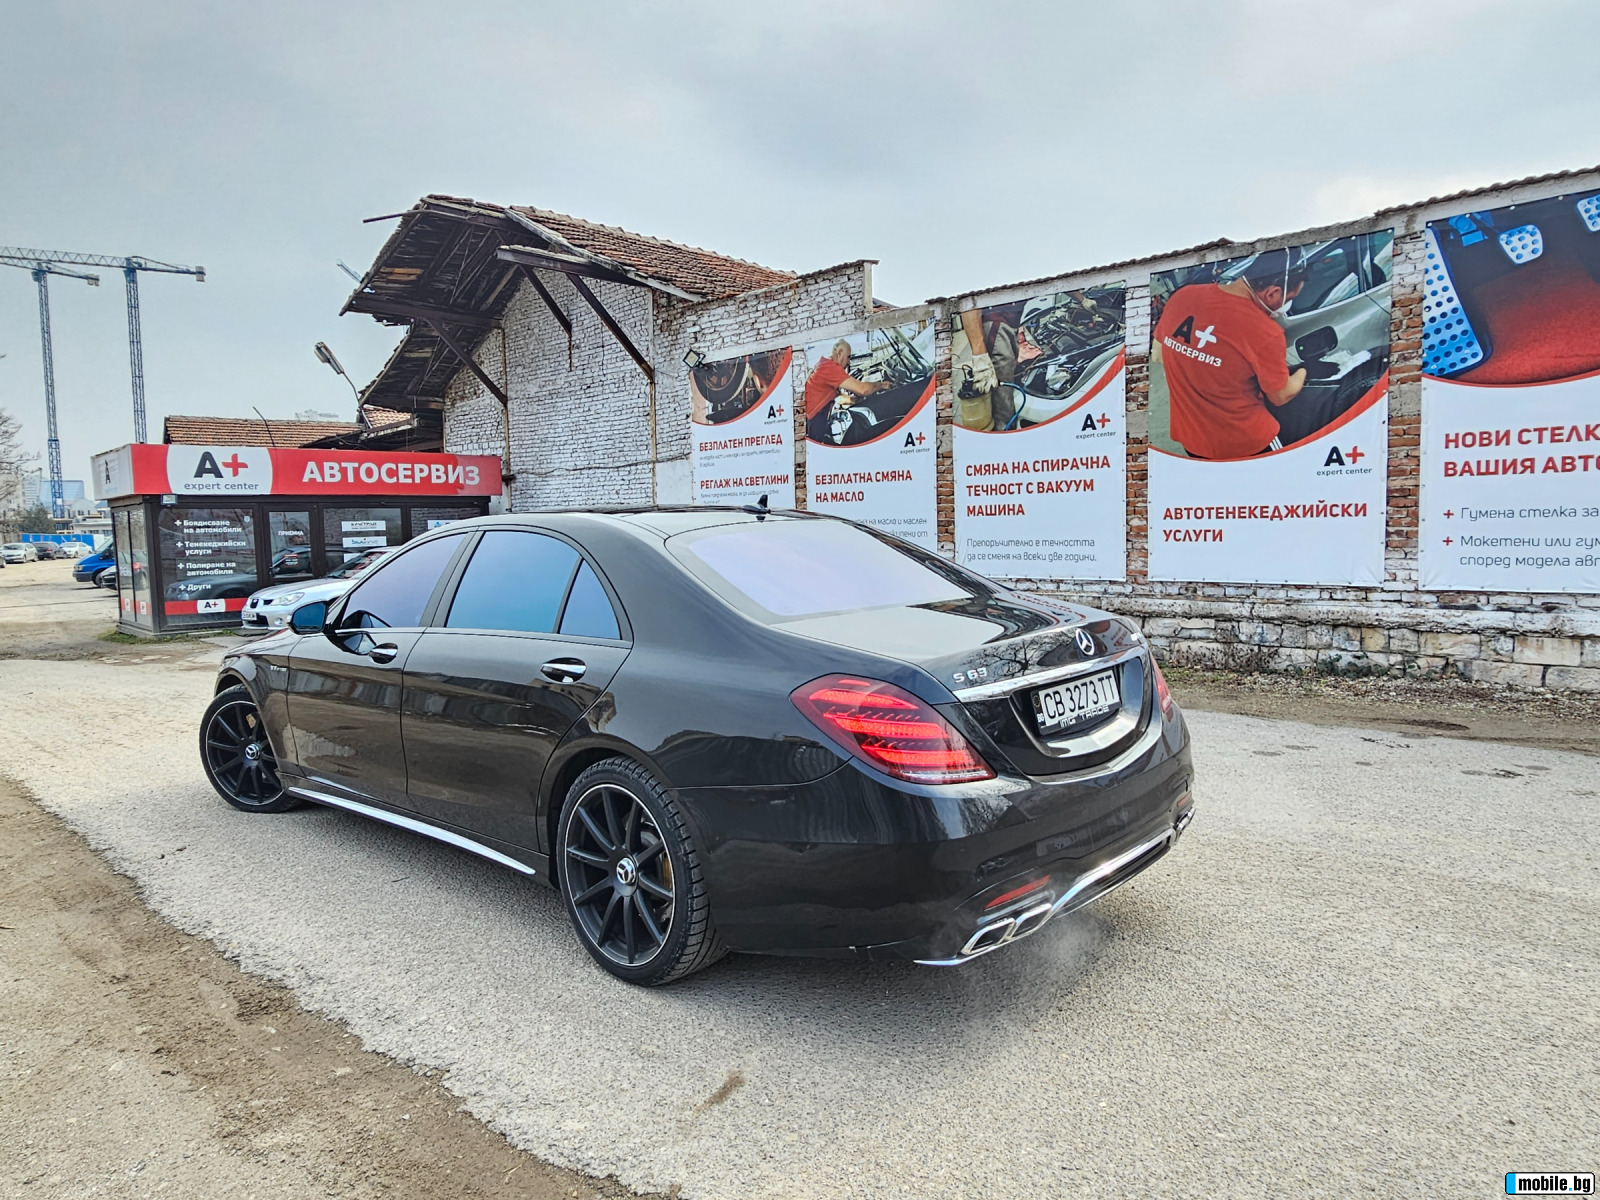 Mercedes-Benz S 63 AMG 6.3AMG 4MATIC LONG TV*PANORAMA*FULL MAX* !TO!  | Mobile.bg   6